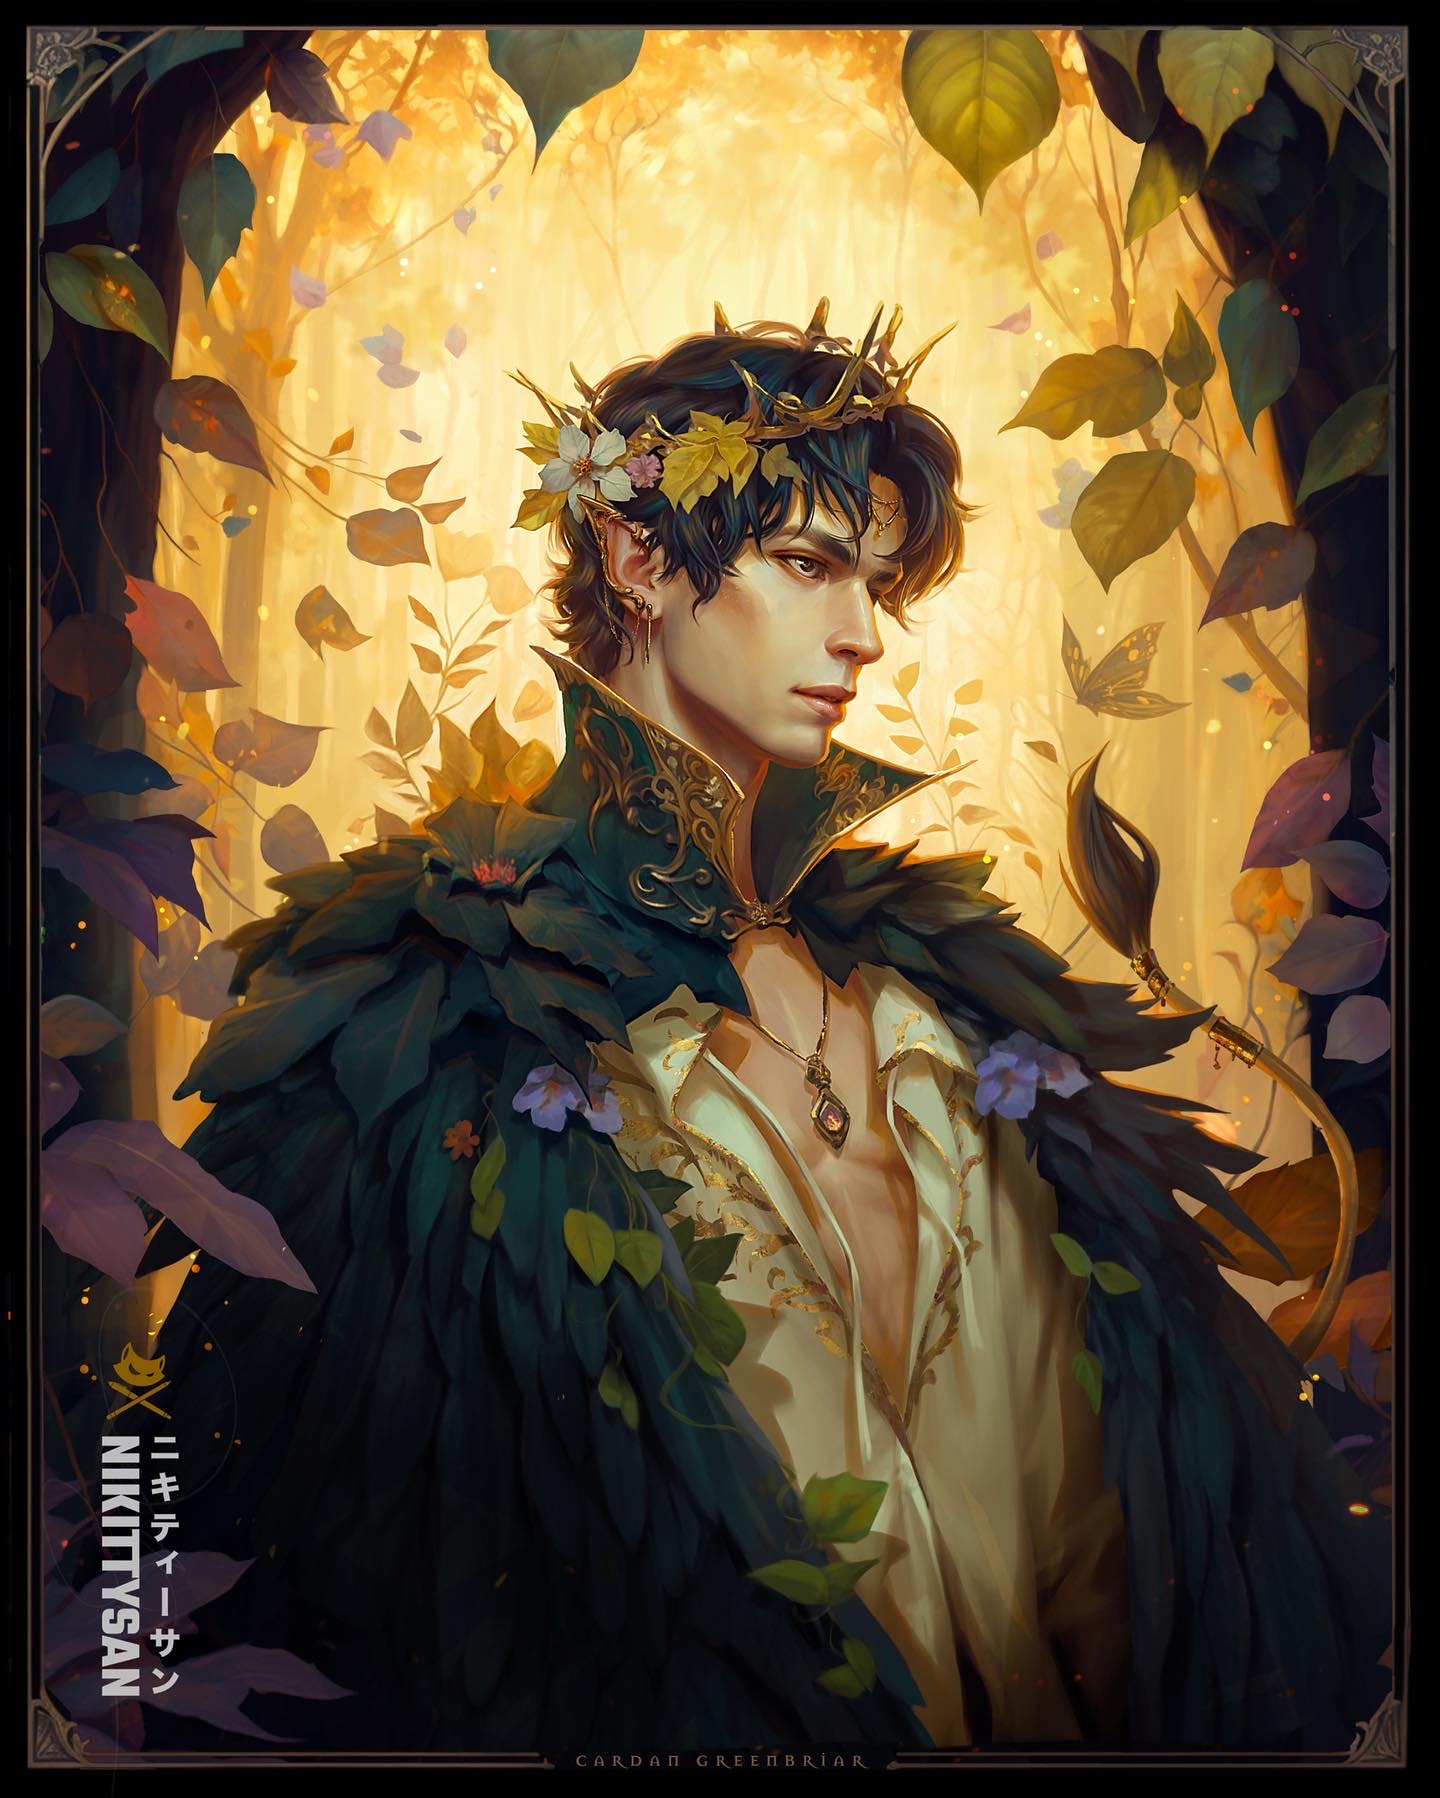 Alegaciones techo Adelaida Nikittysan ∞🌙🌹🔥❤️ on Twitter: "🍁Cardan Greenbriar🍃 - In celebration of  The Stolen Heir releasing today, here's Cardan from the Folk of the Air  series!! I LOVED that series so I'm so excited